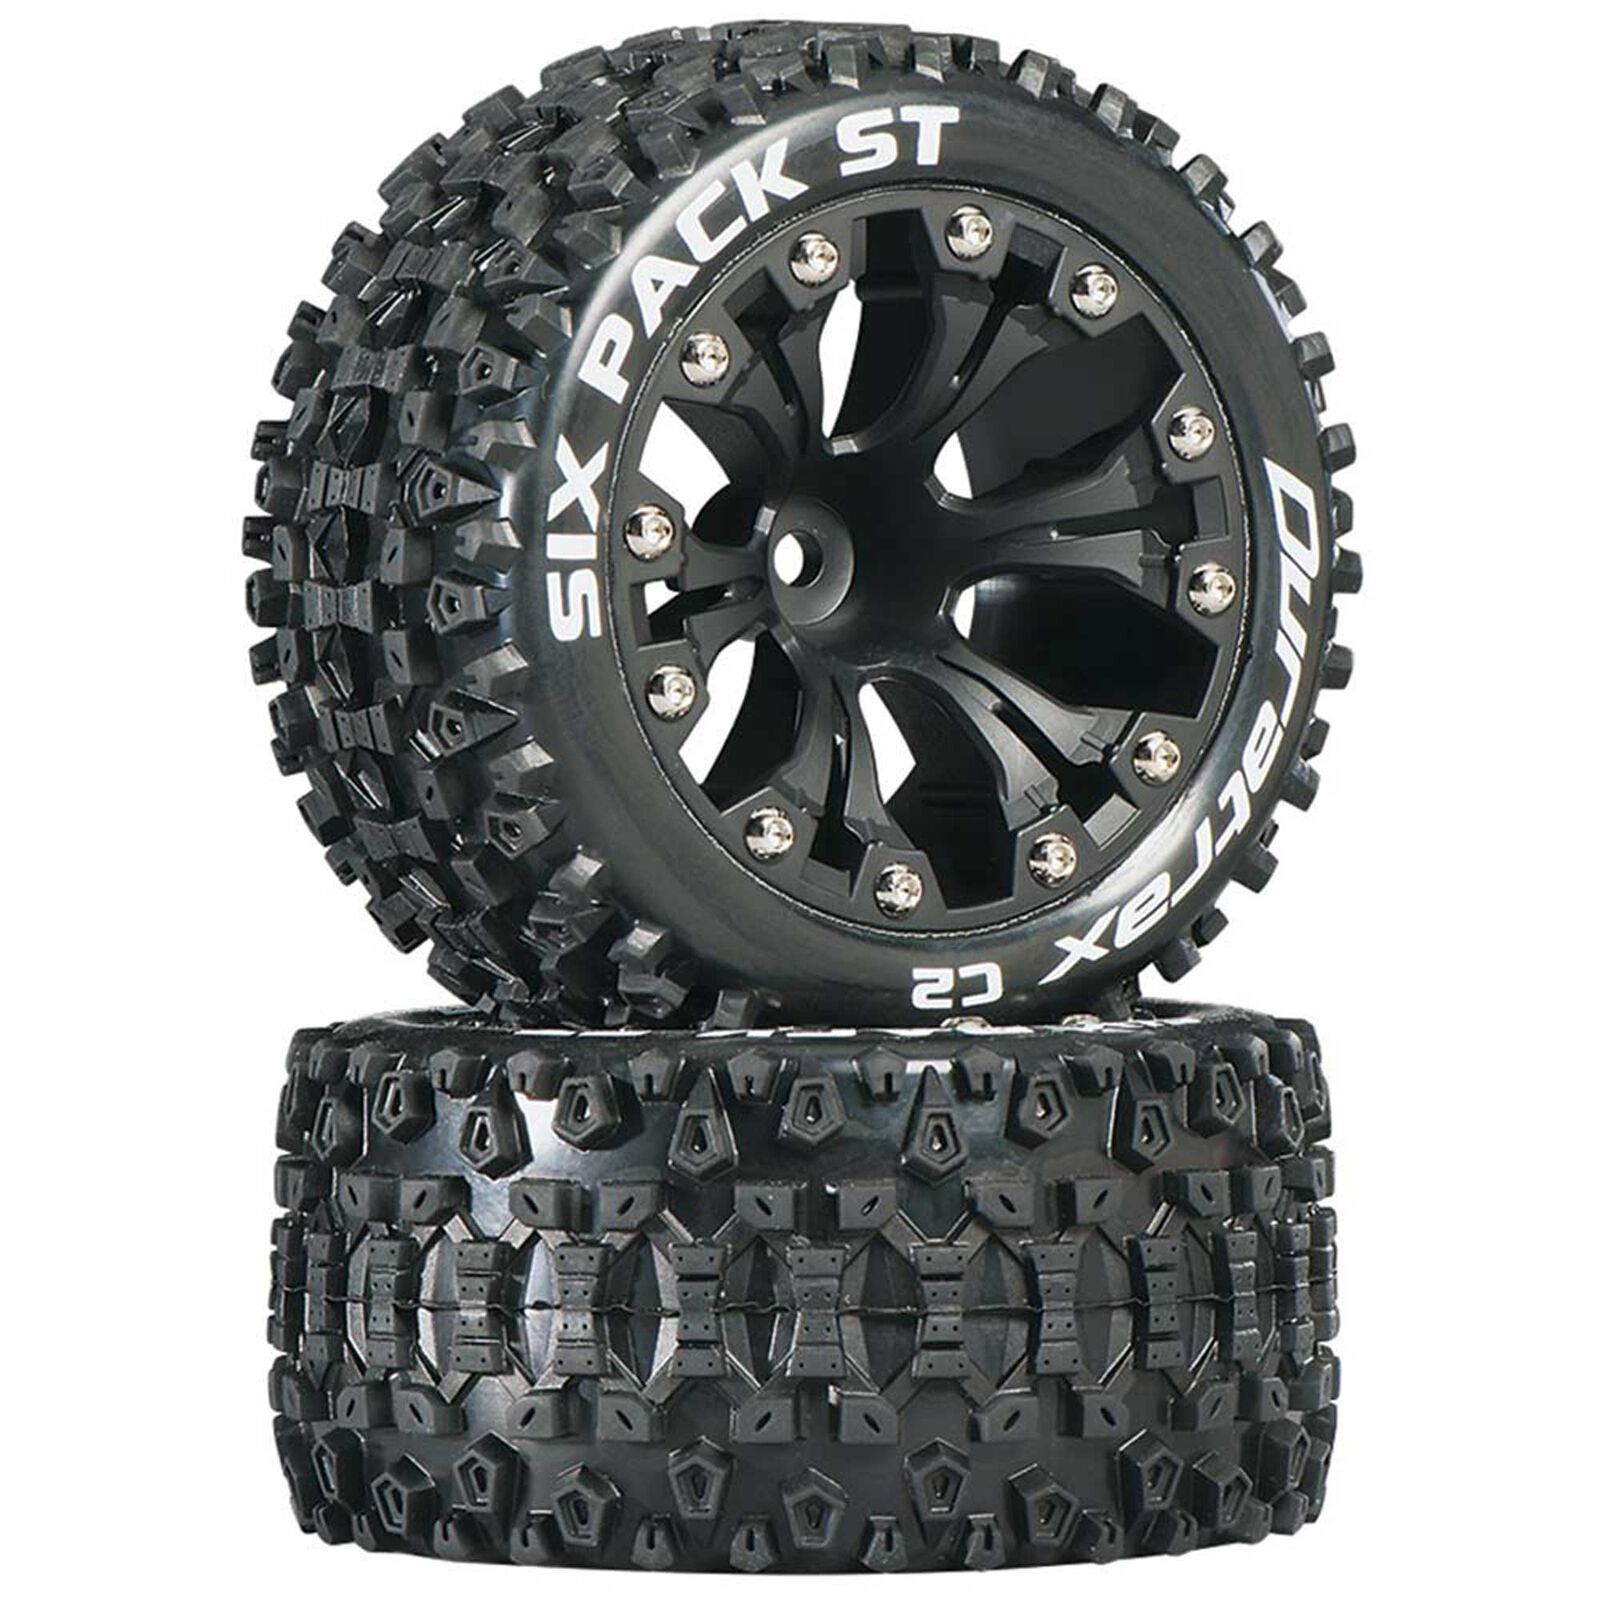 Six Pack ST 2.8" 2WD Mounted 1/2" Offset Tires, Black (2)